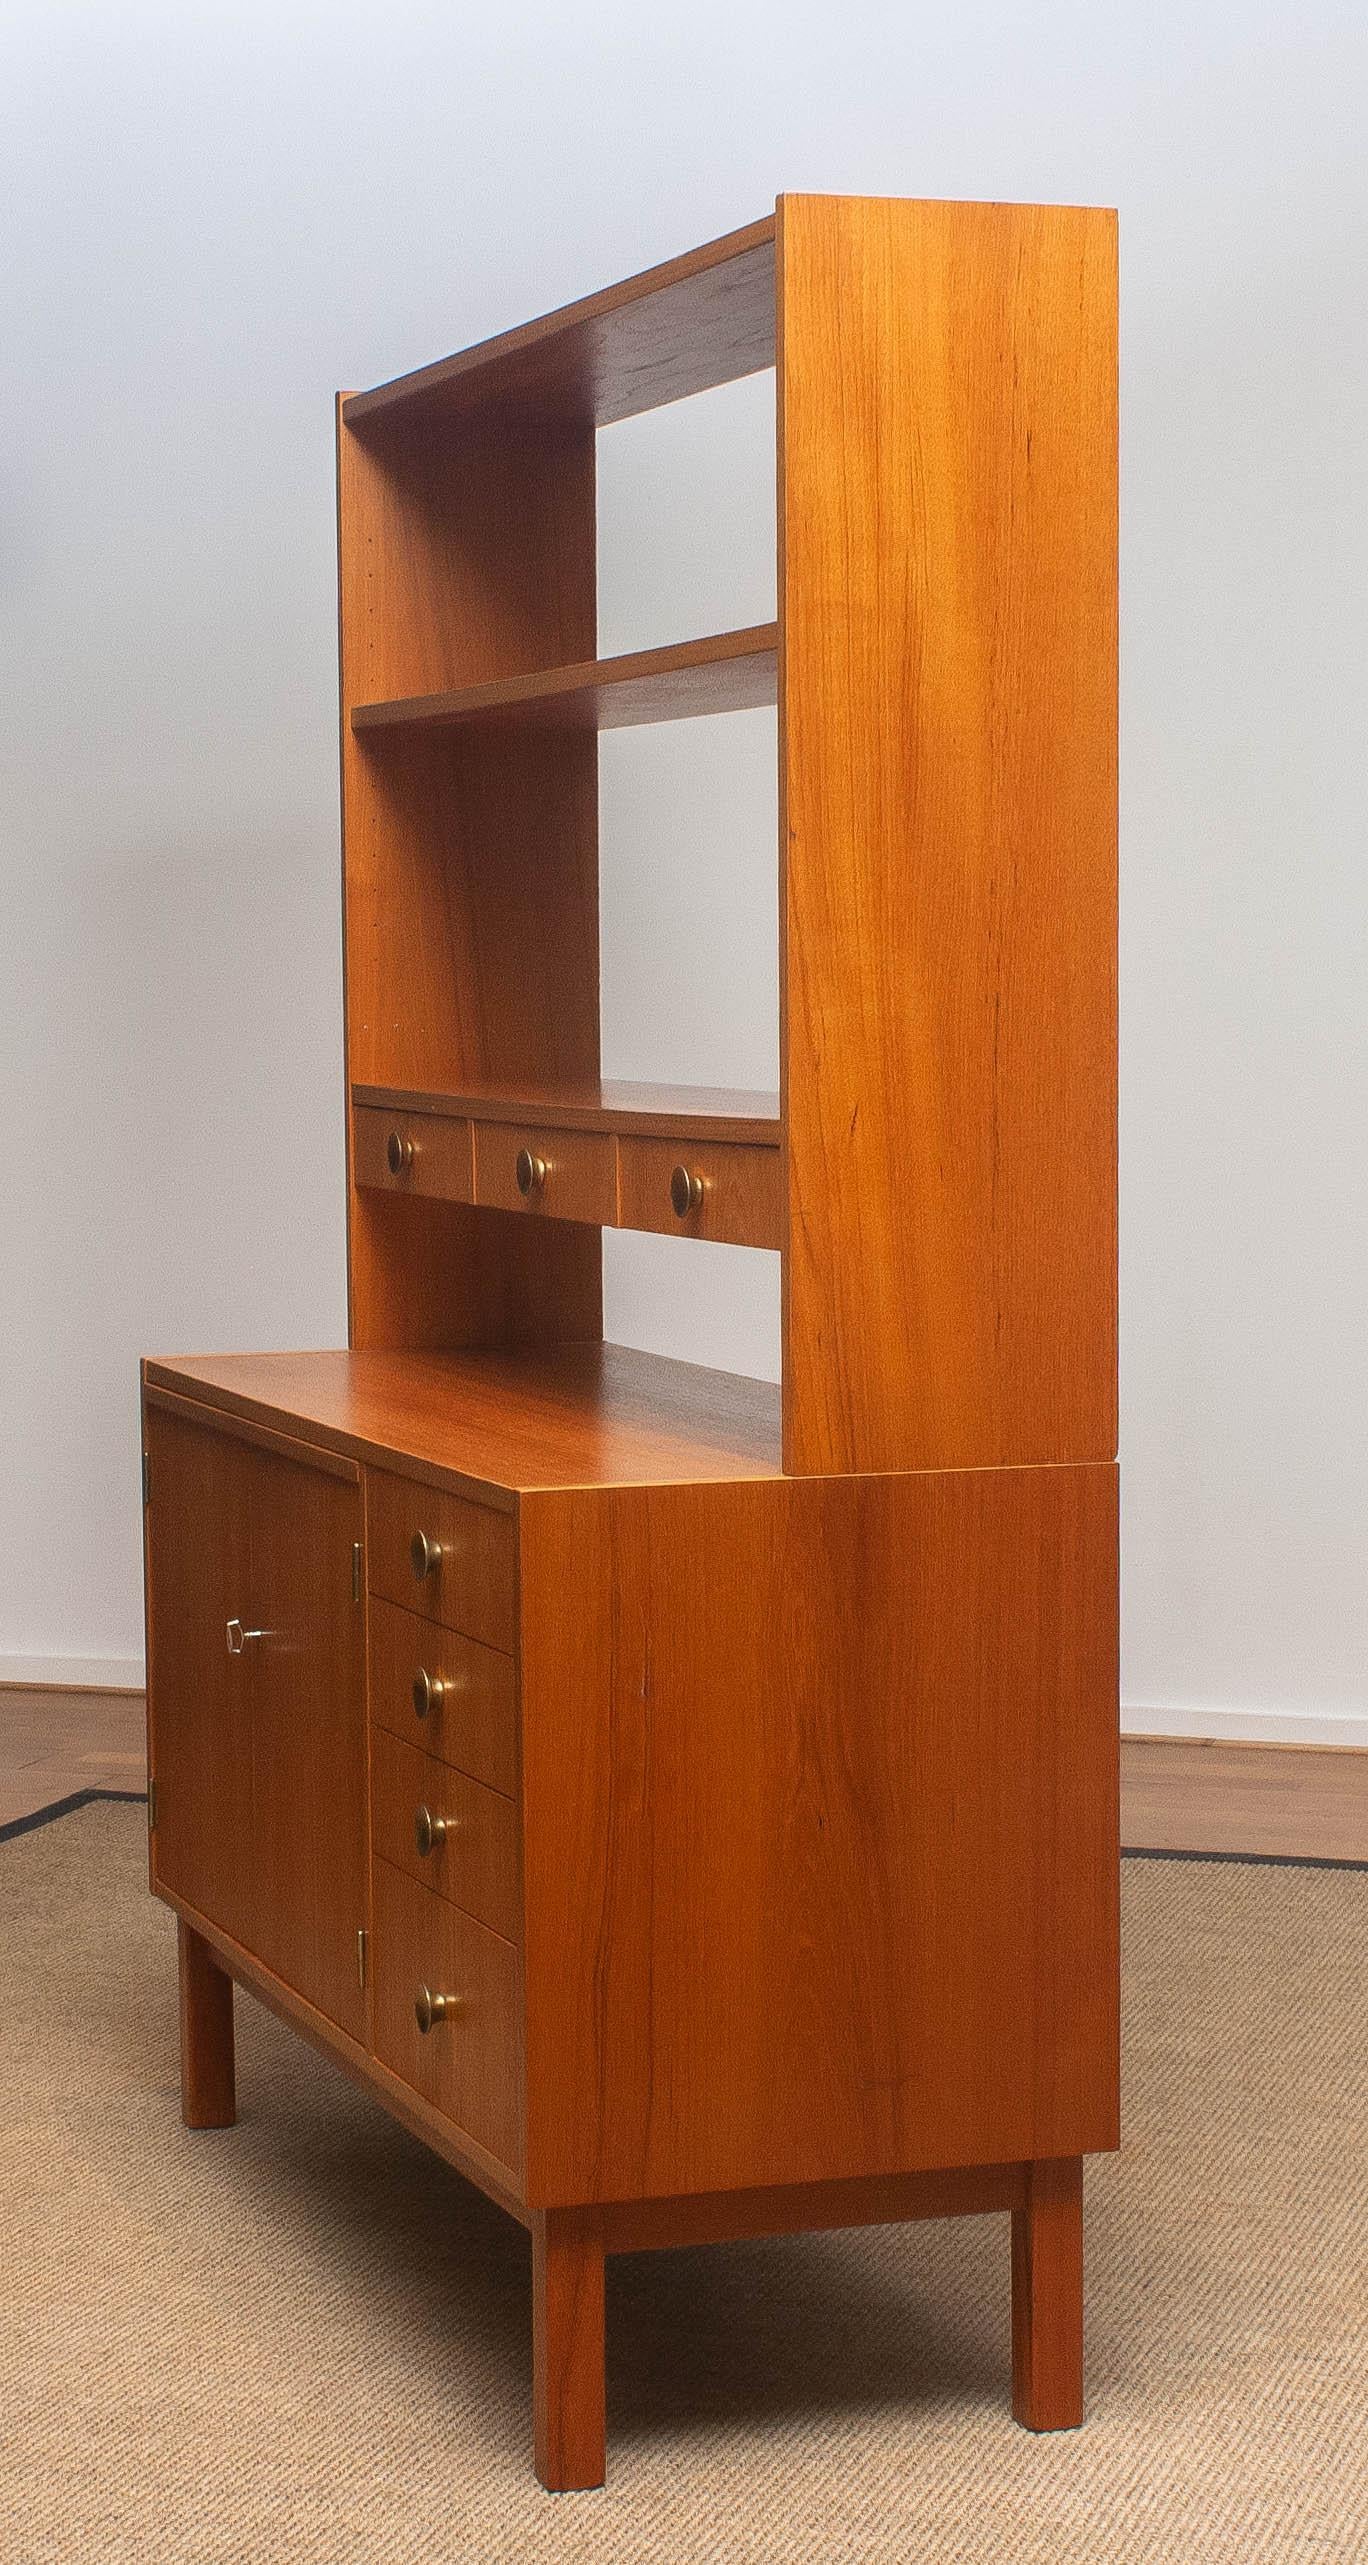 1950s Teak Veneer and Brass Bookshelves Cabinet with Writing Space from Sweden 1